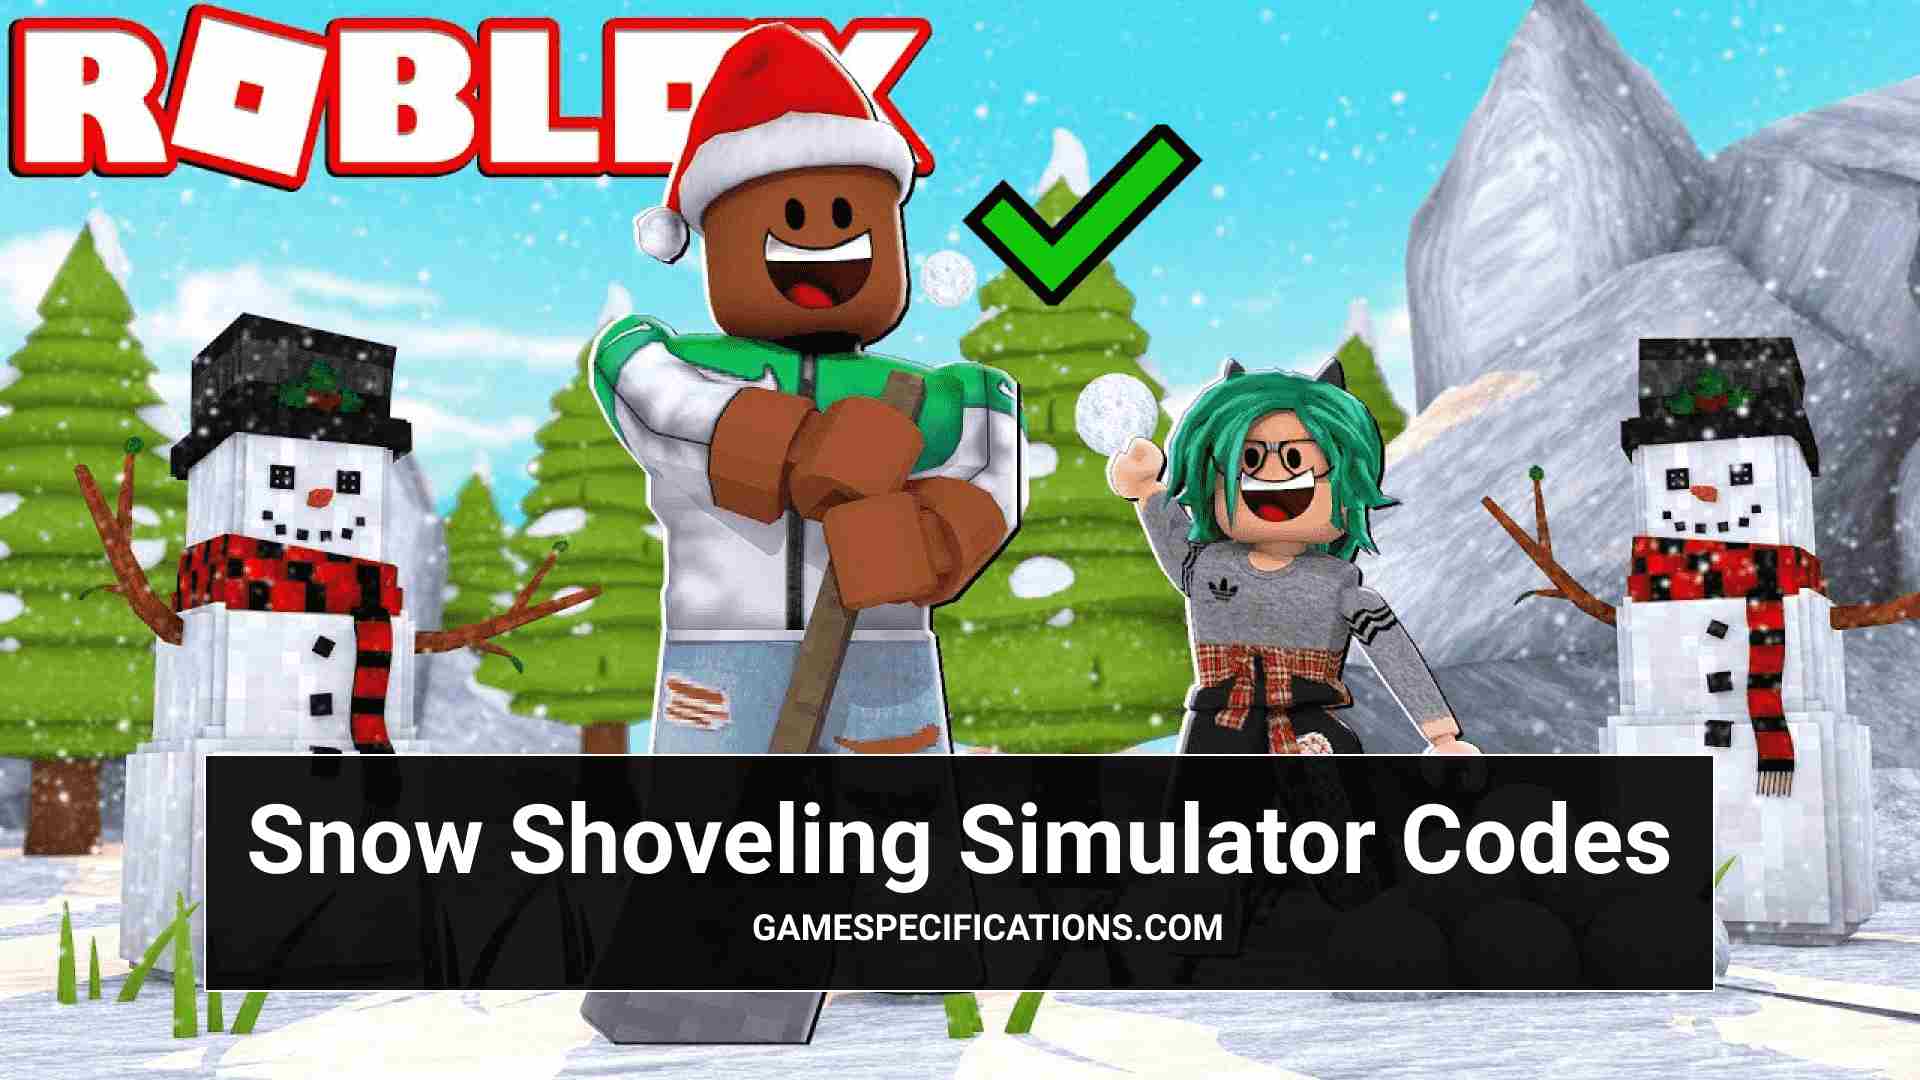 Roblox Codes For Snow Shoveling Simulator